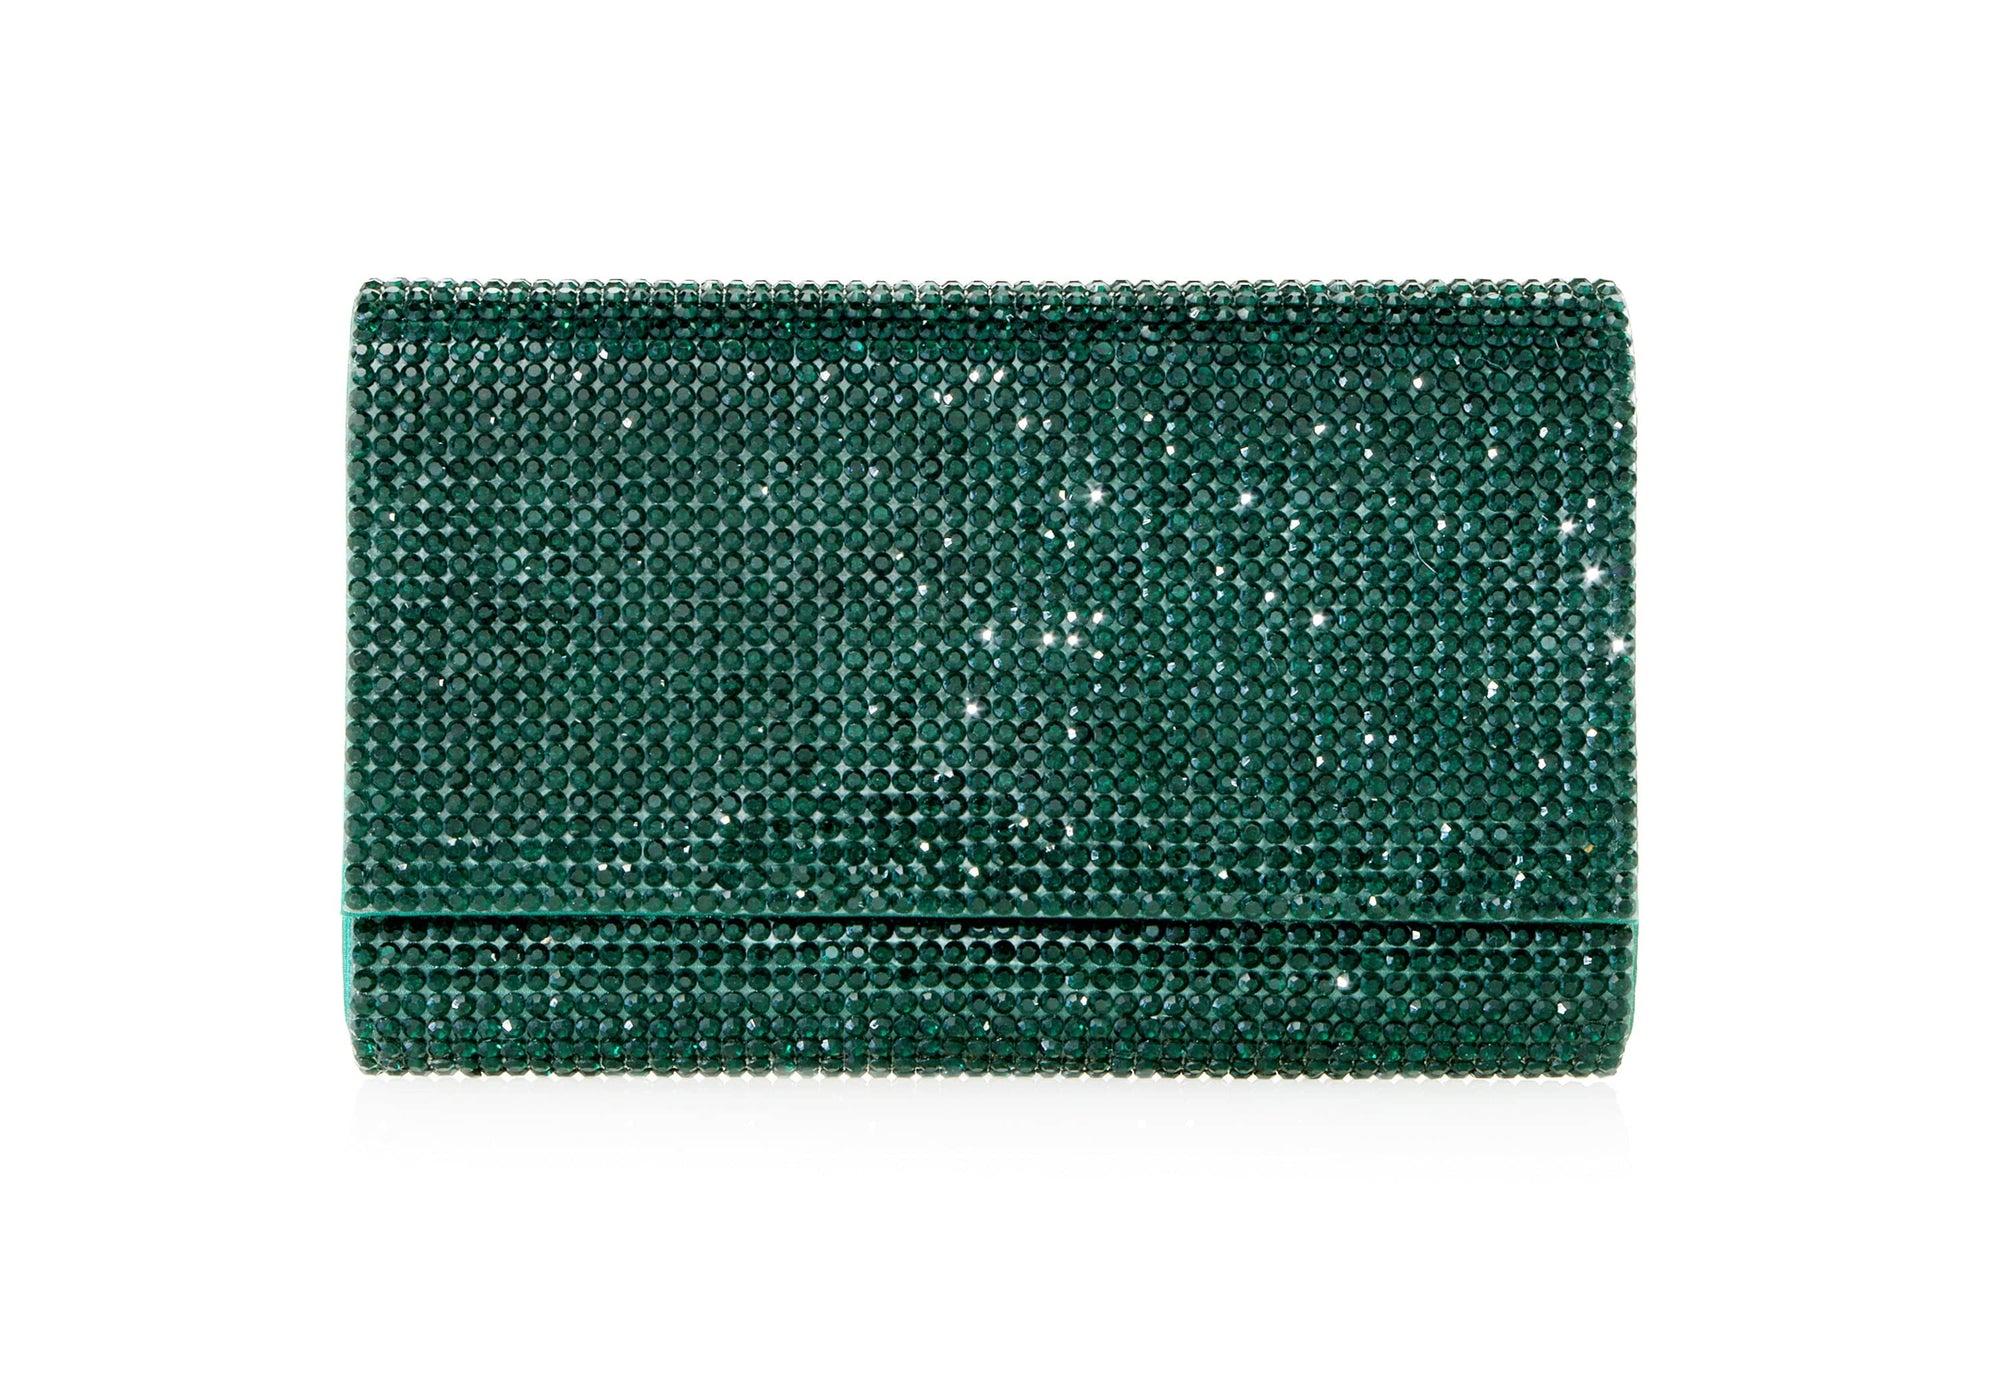 Judith Leiber Couture Fizzoni Crystal Clutch